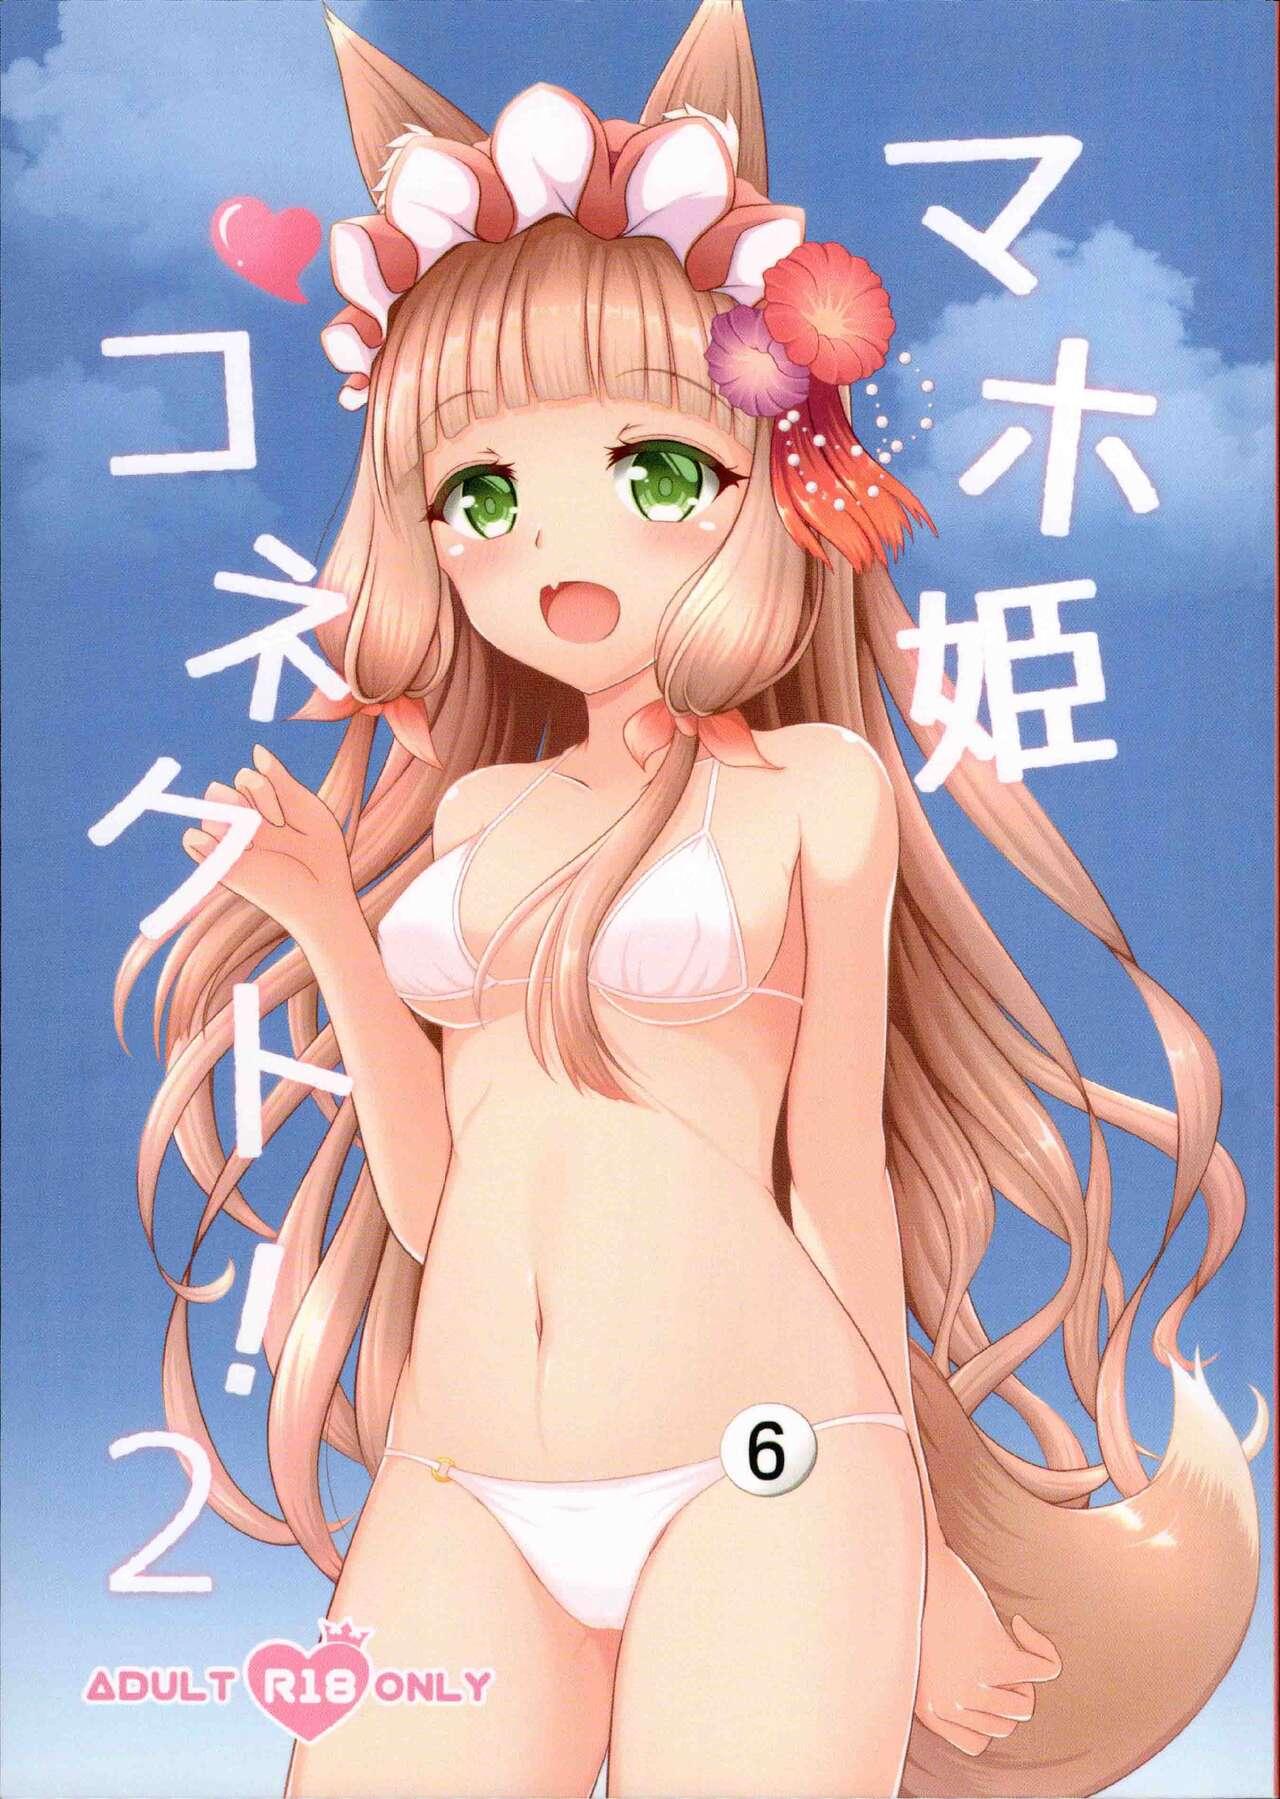 Nude Maho Hime Connect! 2 - Princess connect 1080p - Page 1